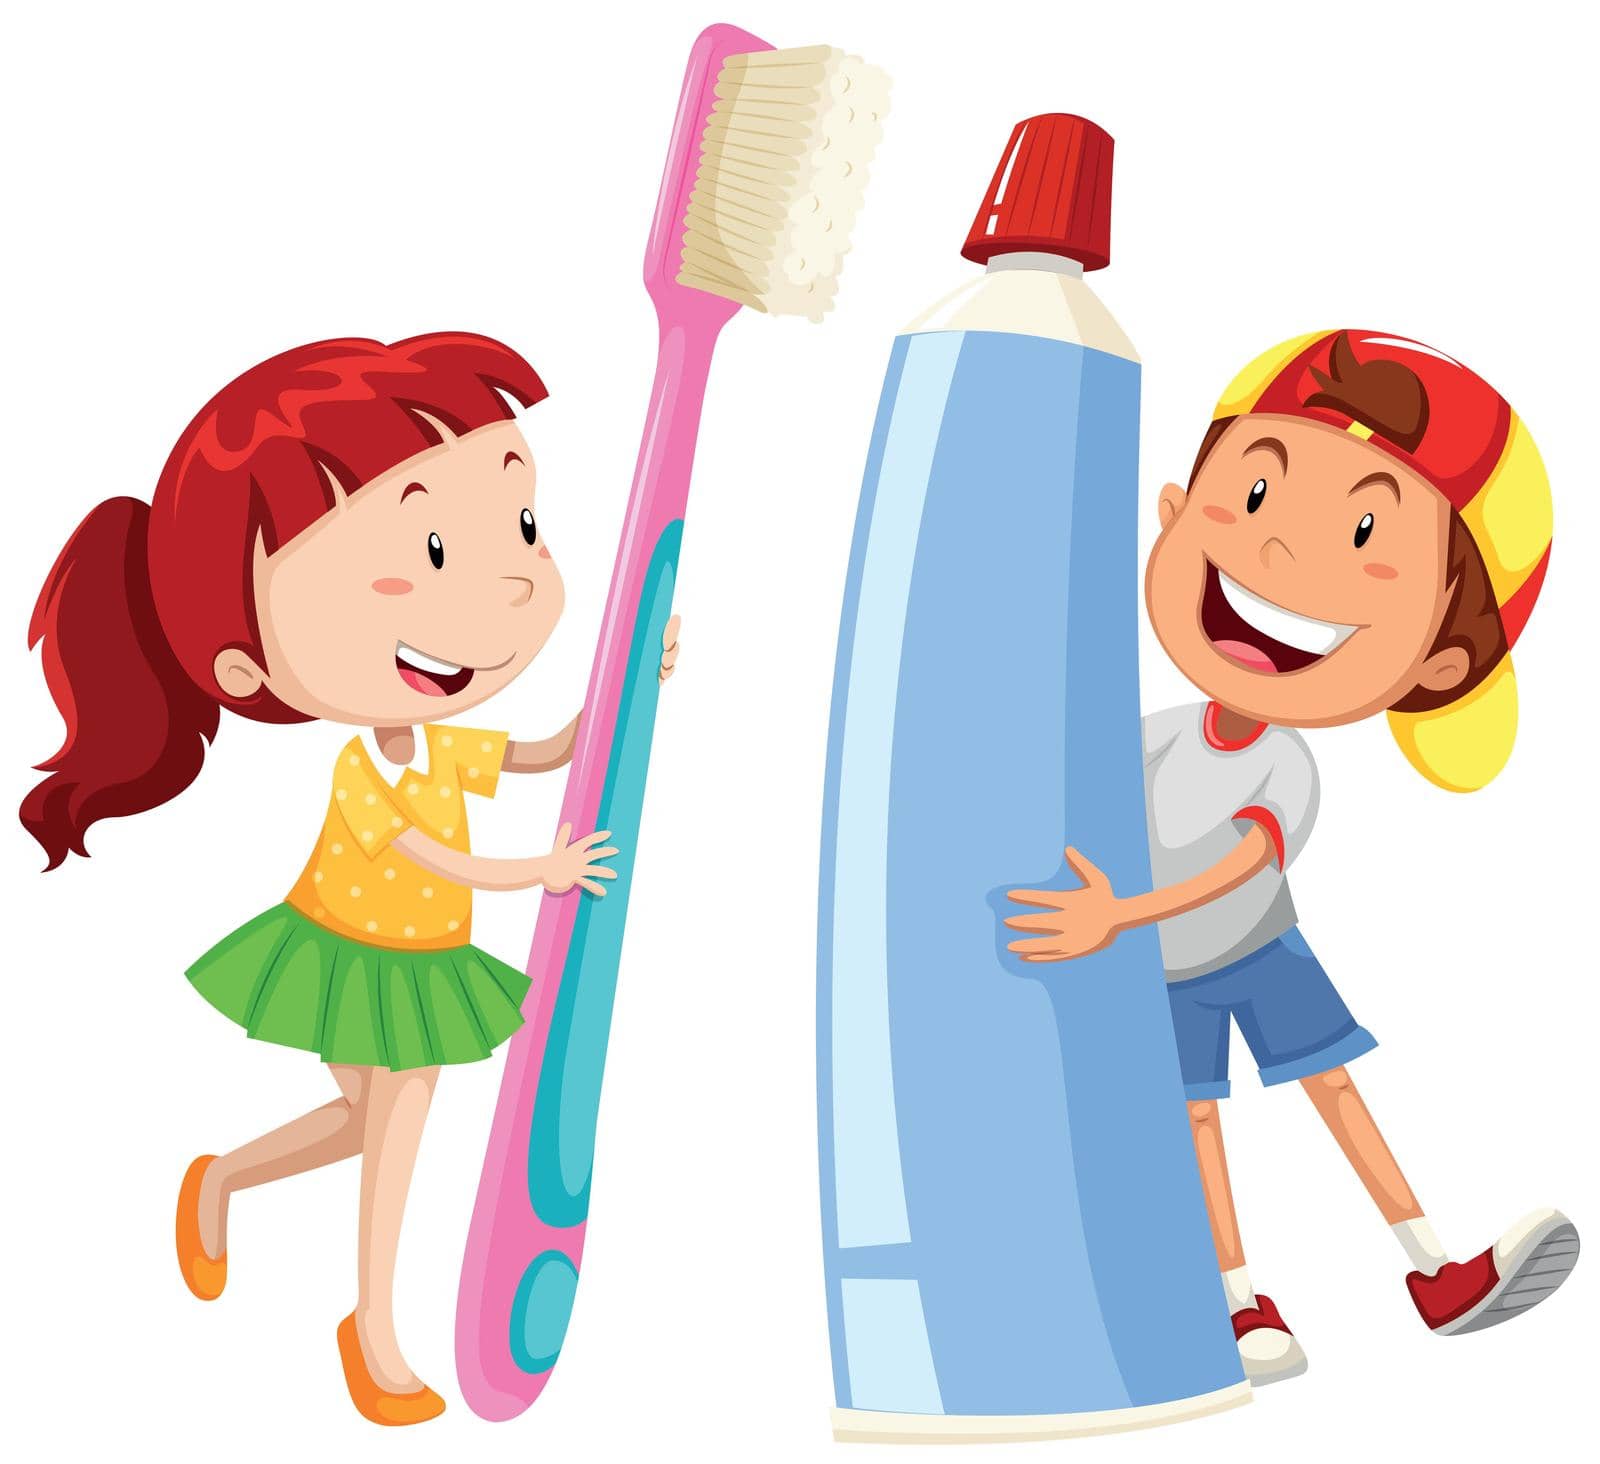 Boy and girl with giant toothbrush and paste by iimages